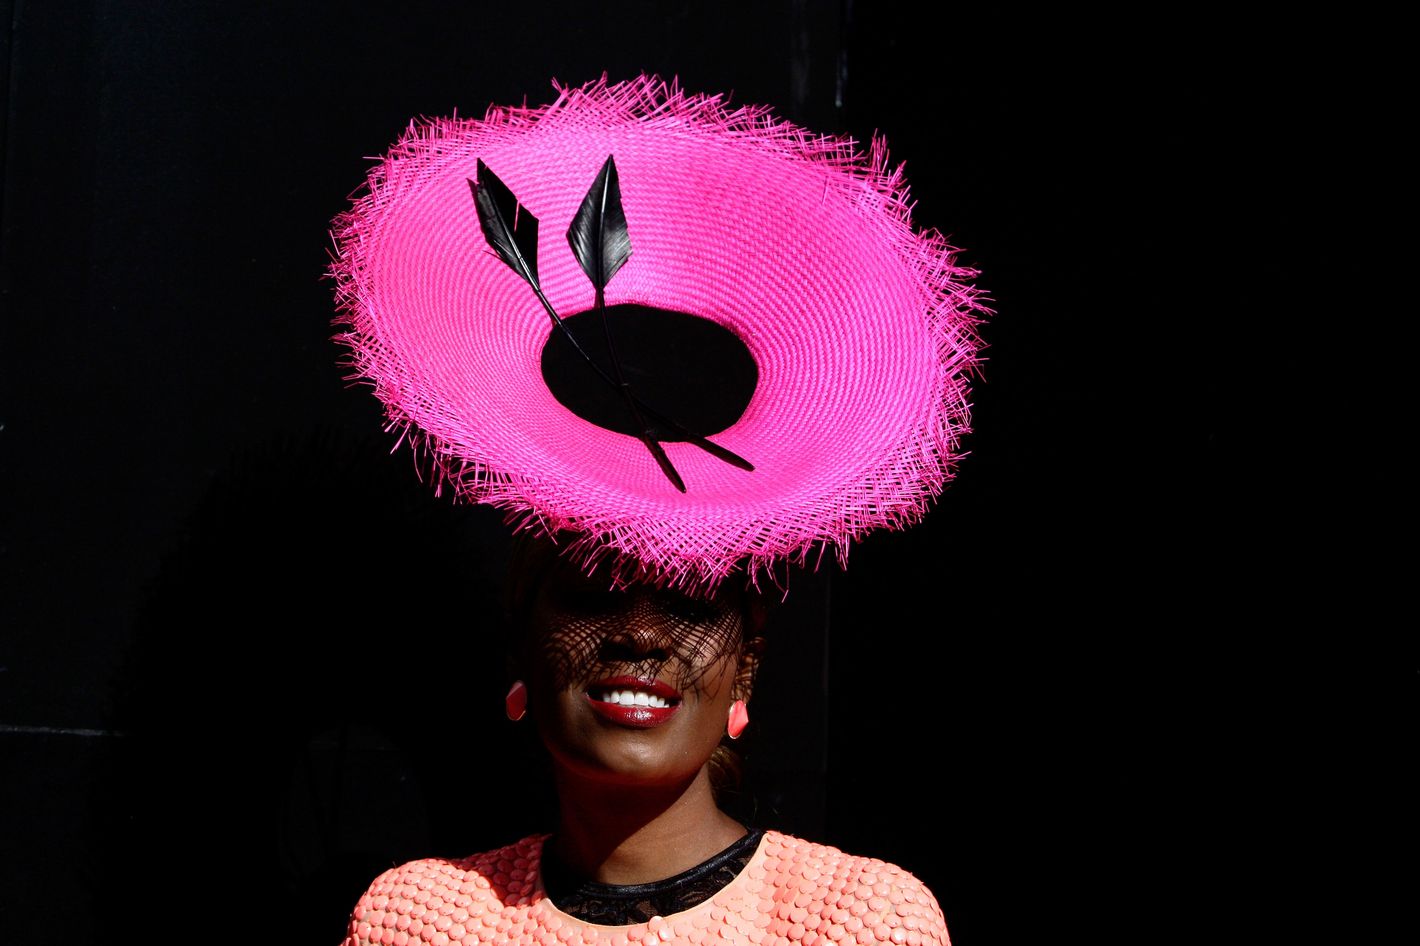 All the Kooky, Vibrant Hats of the Melbourne image